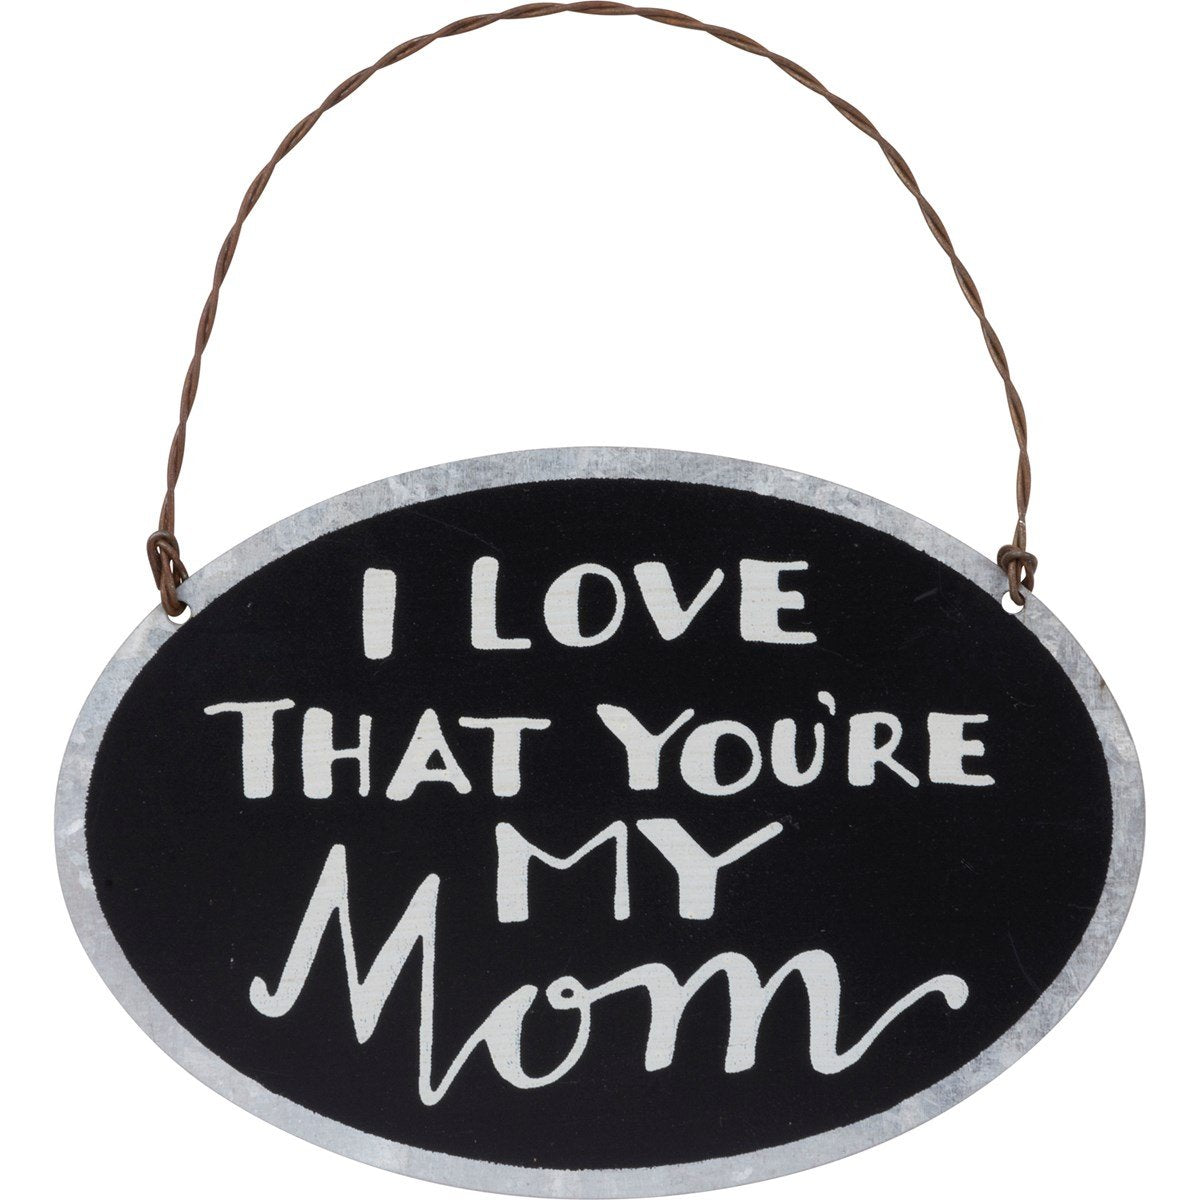 I Love That You’re My Mom Ornament - Signs & More